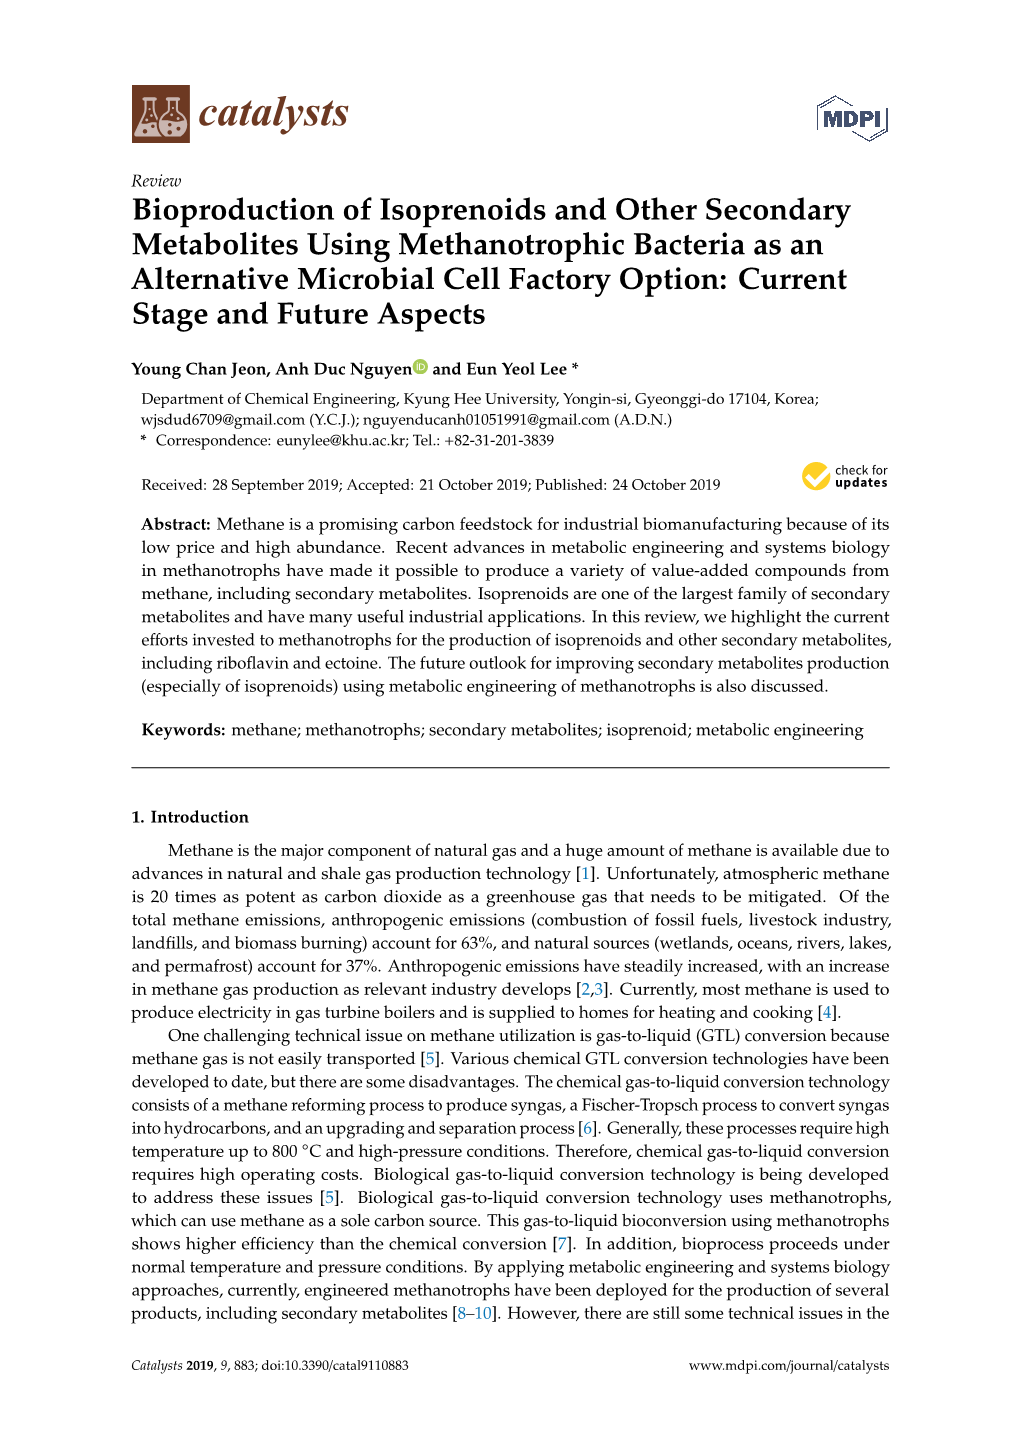 Bioproduction of Isoprenoids and Other Secondary Metabolites Using